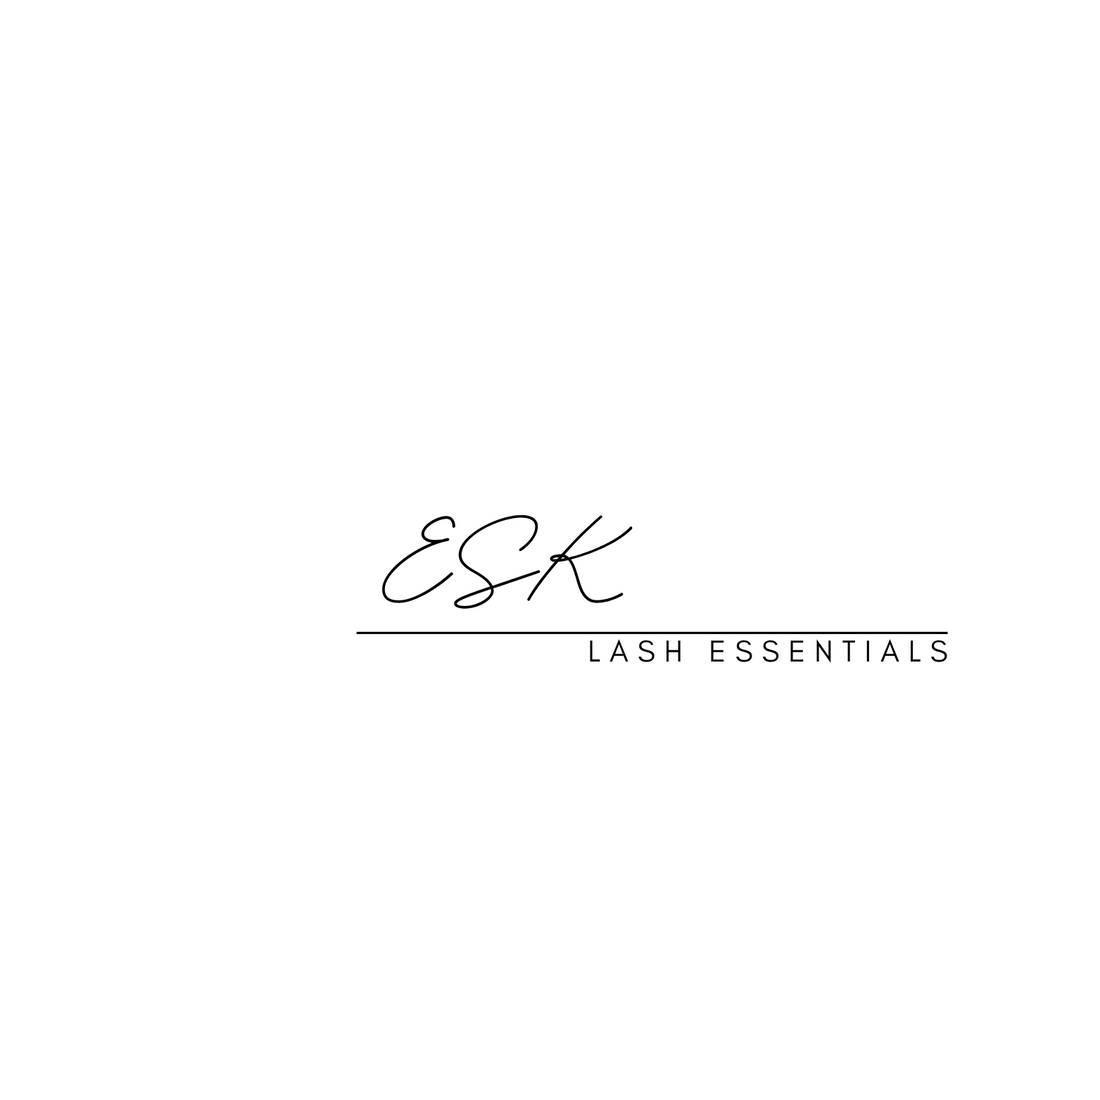 ESK Lash Must-Haves! ESK eyelash extension products and supplies 8/11/23 12:50pm